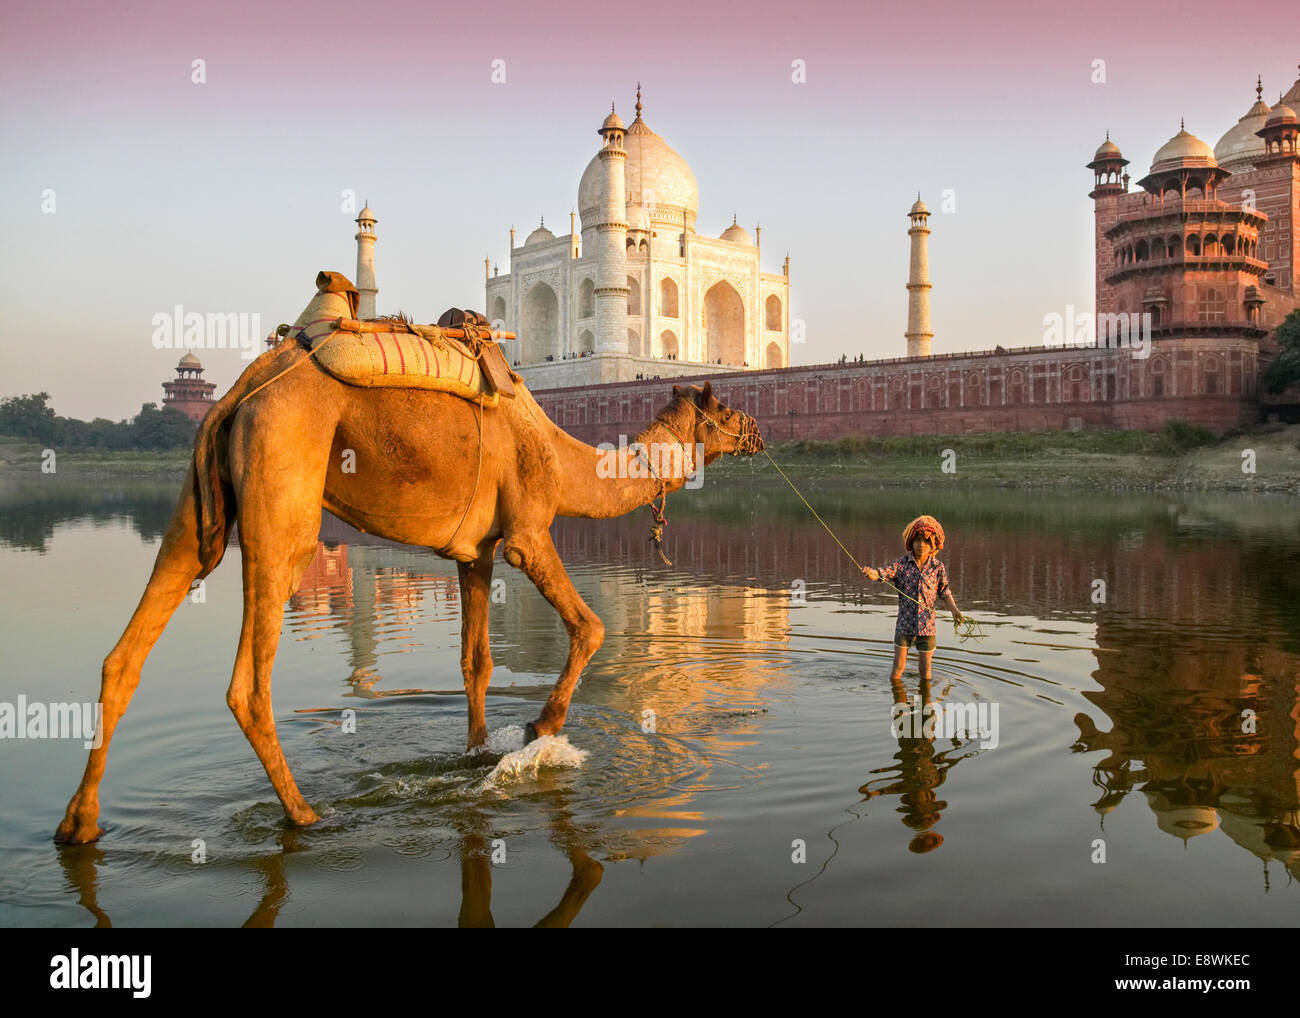 TAJ MAHAL AGRA INDIA CAMEL BOY WITH A CAMEL DRINKING THE WATER OF THE YAMUNA RIVER Stock Photo